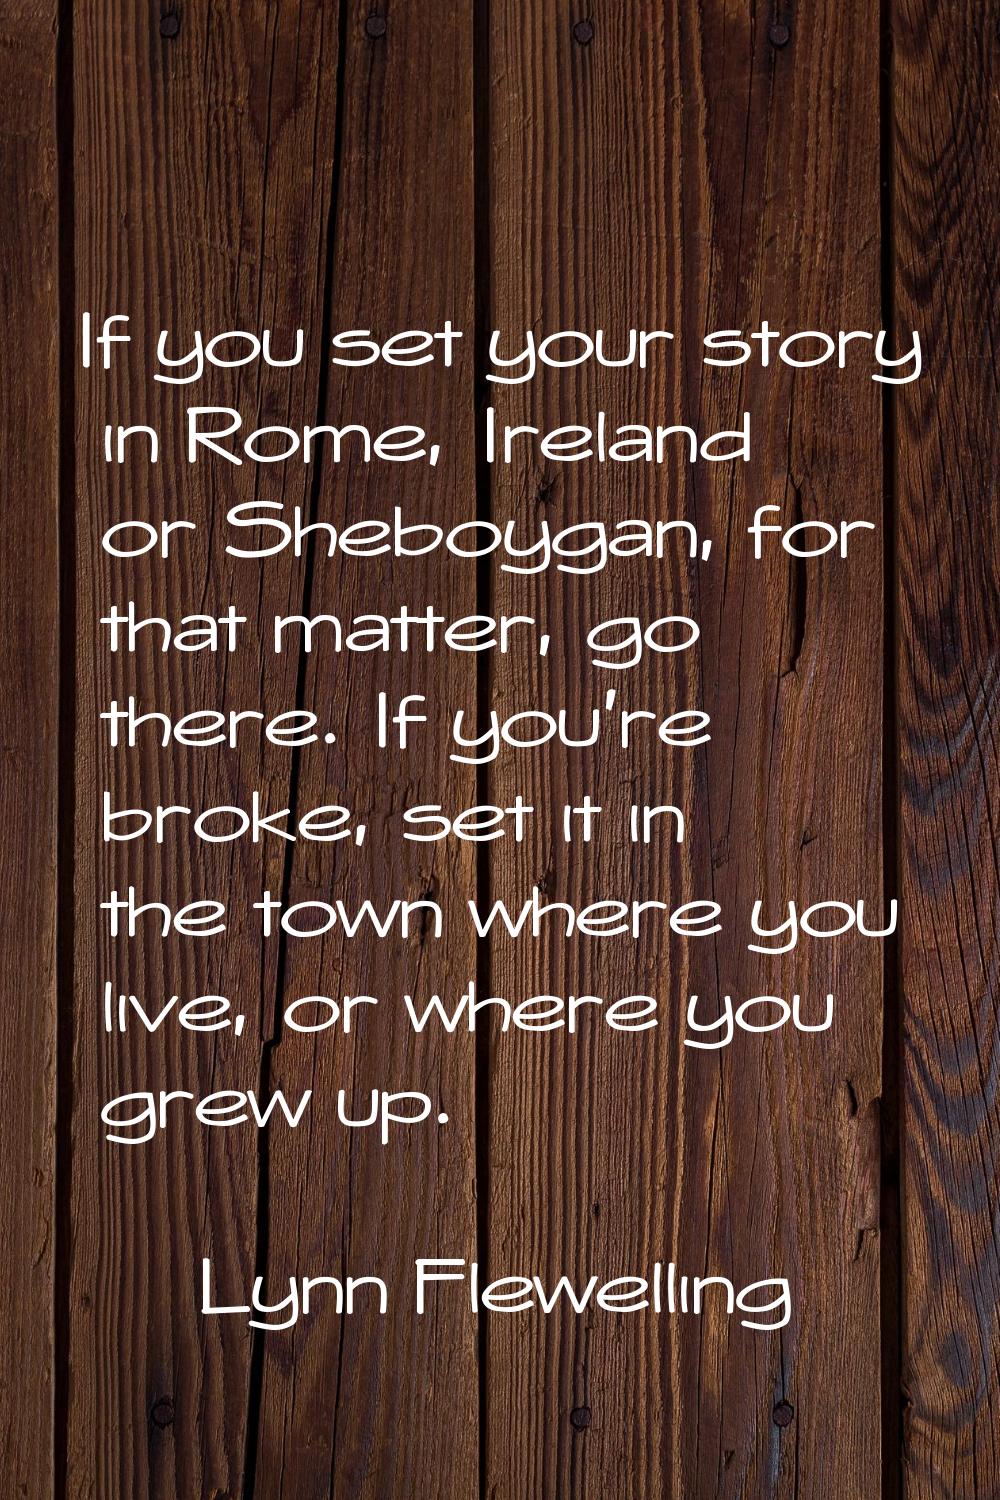 If you set your story in Rome, Ireland or Sheboygan, for that matter, go there. If you're broke, se